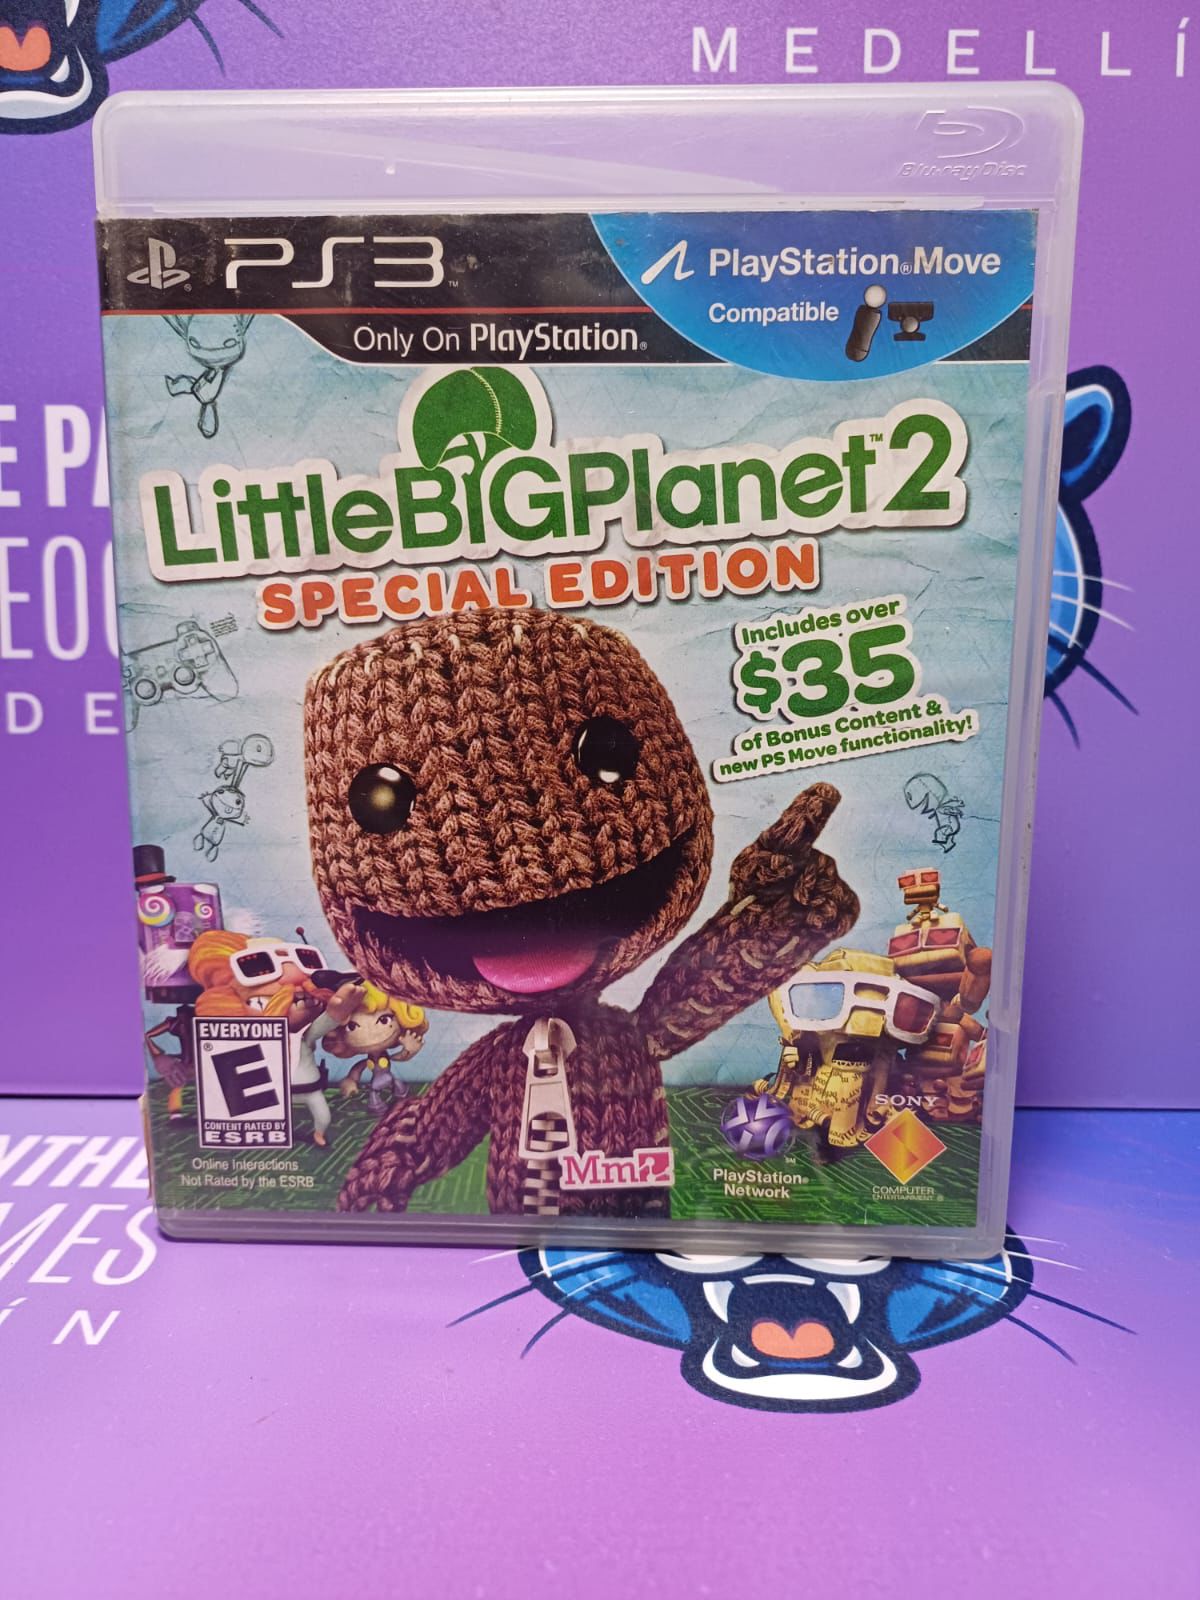 Little Big Planet 2 special edition - Playstation 3